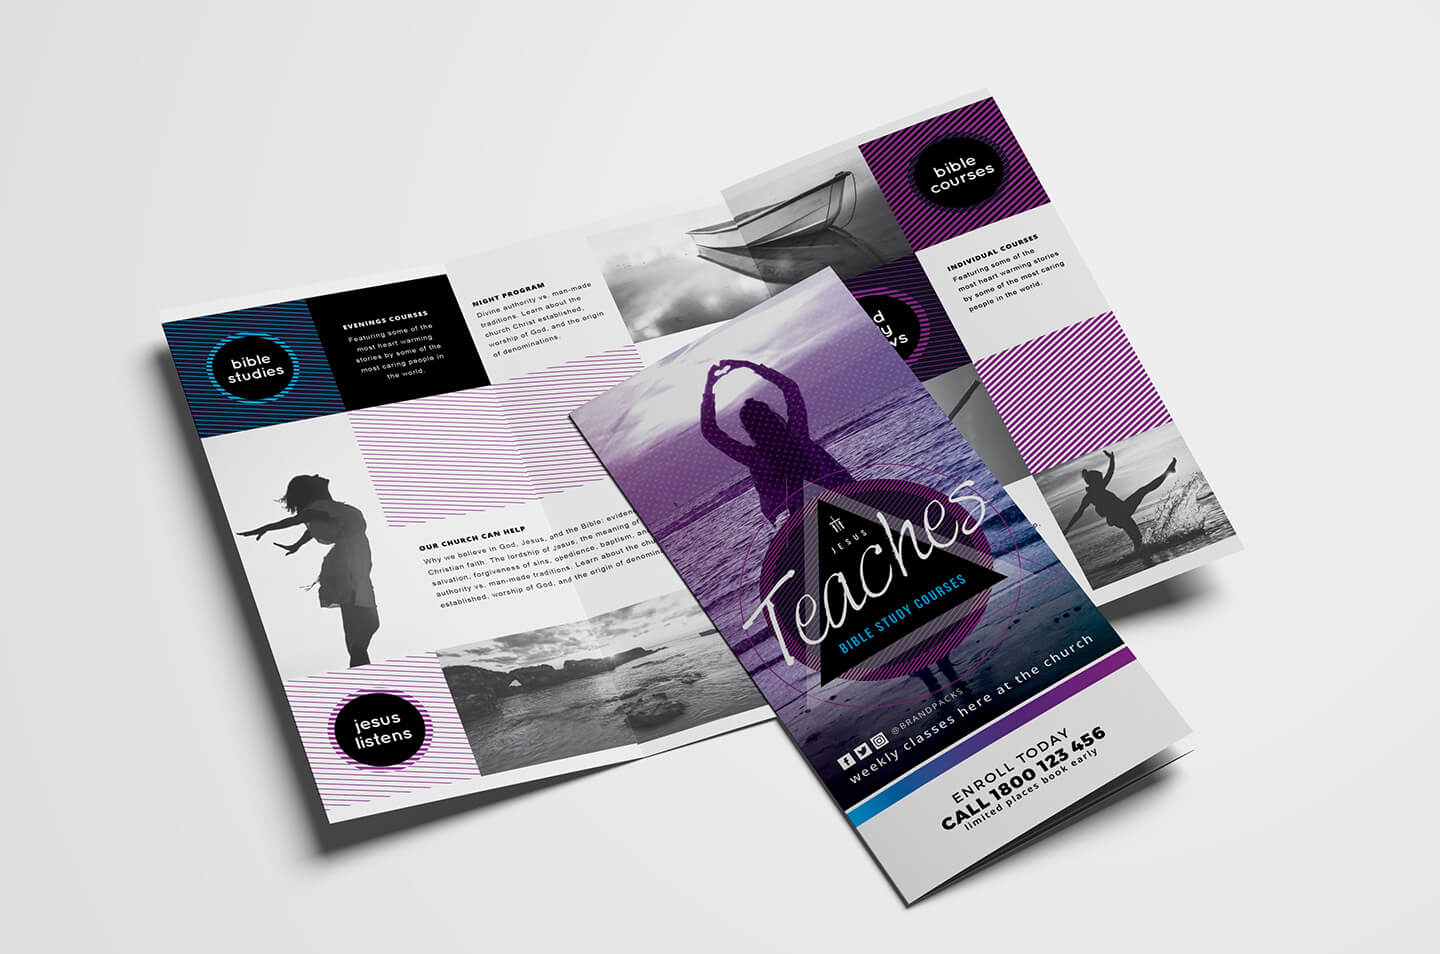 Free Church Templates – Photoshop Psd & Illustrator Ai Intended For Free Illustrator Brochure Templates Download